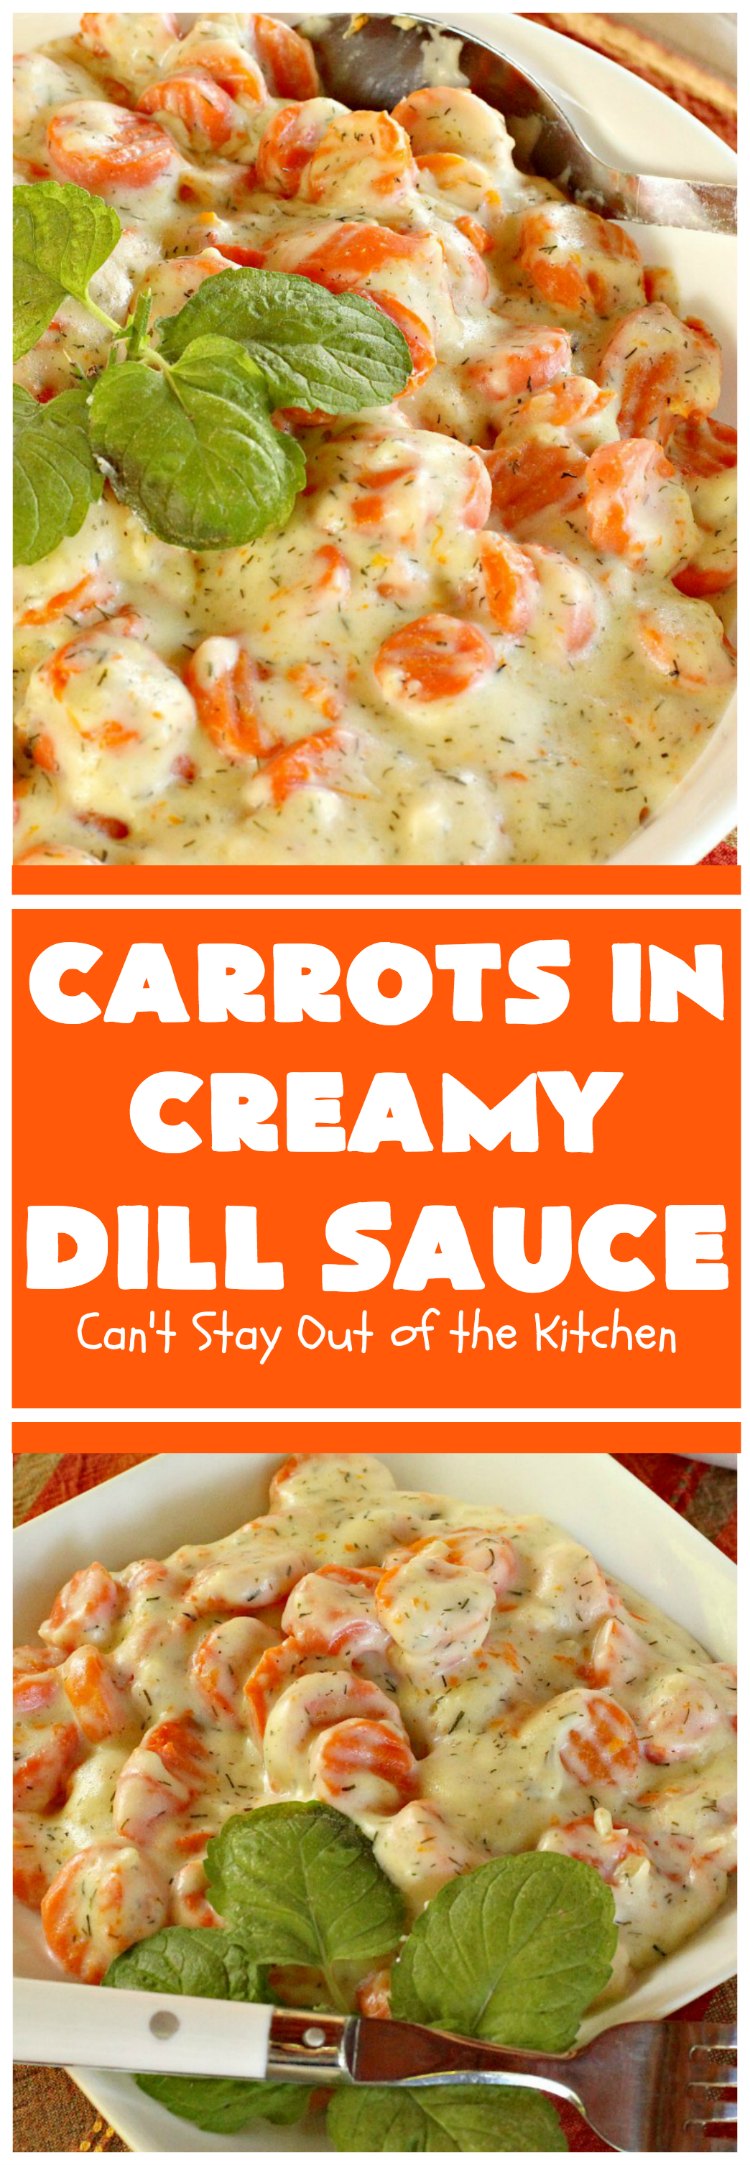 Carrots in Creamy Dill Sauce | Can't Stay Out of the Kitchen